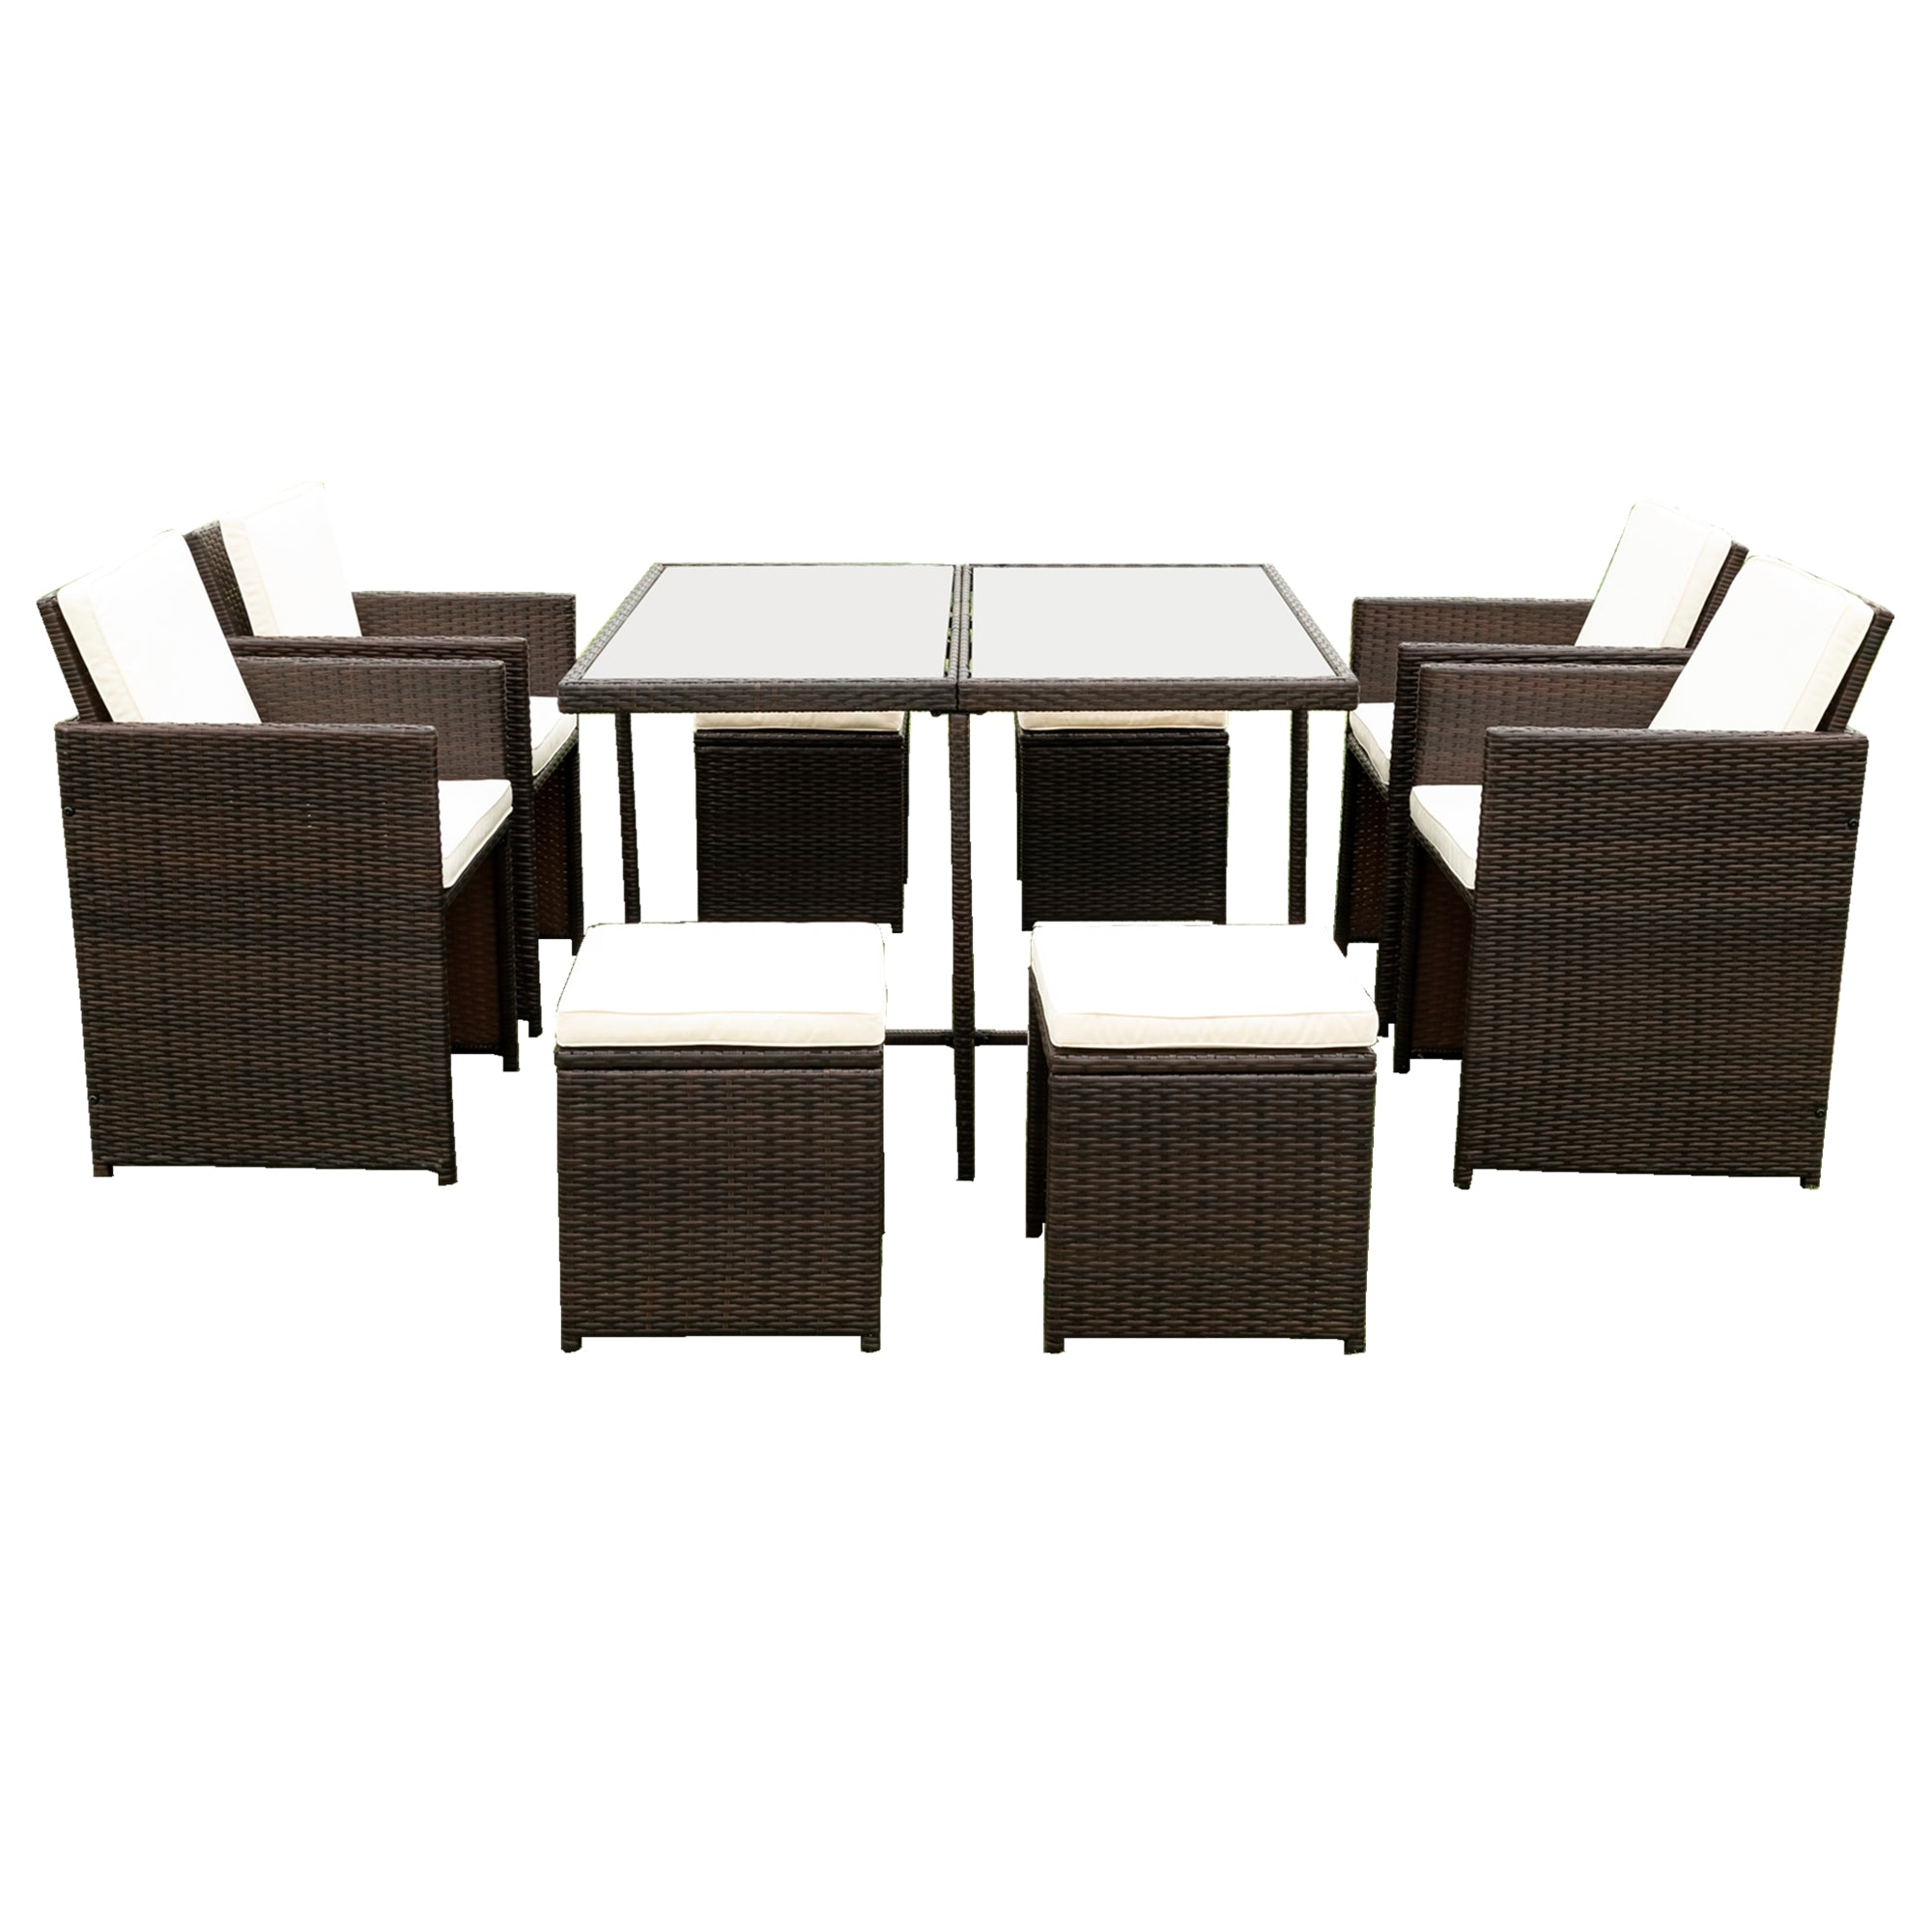 RaDEWAY 9 Pieces Patio Dining Sets Outdoor Space Saving Rattan Chairs